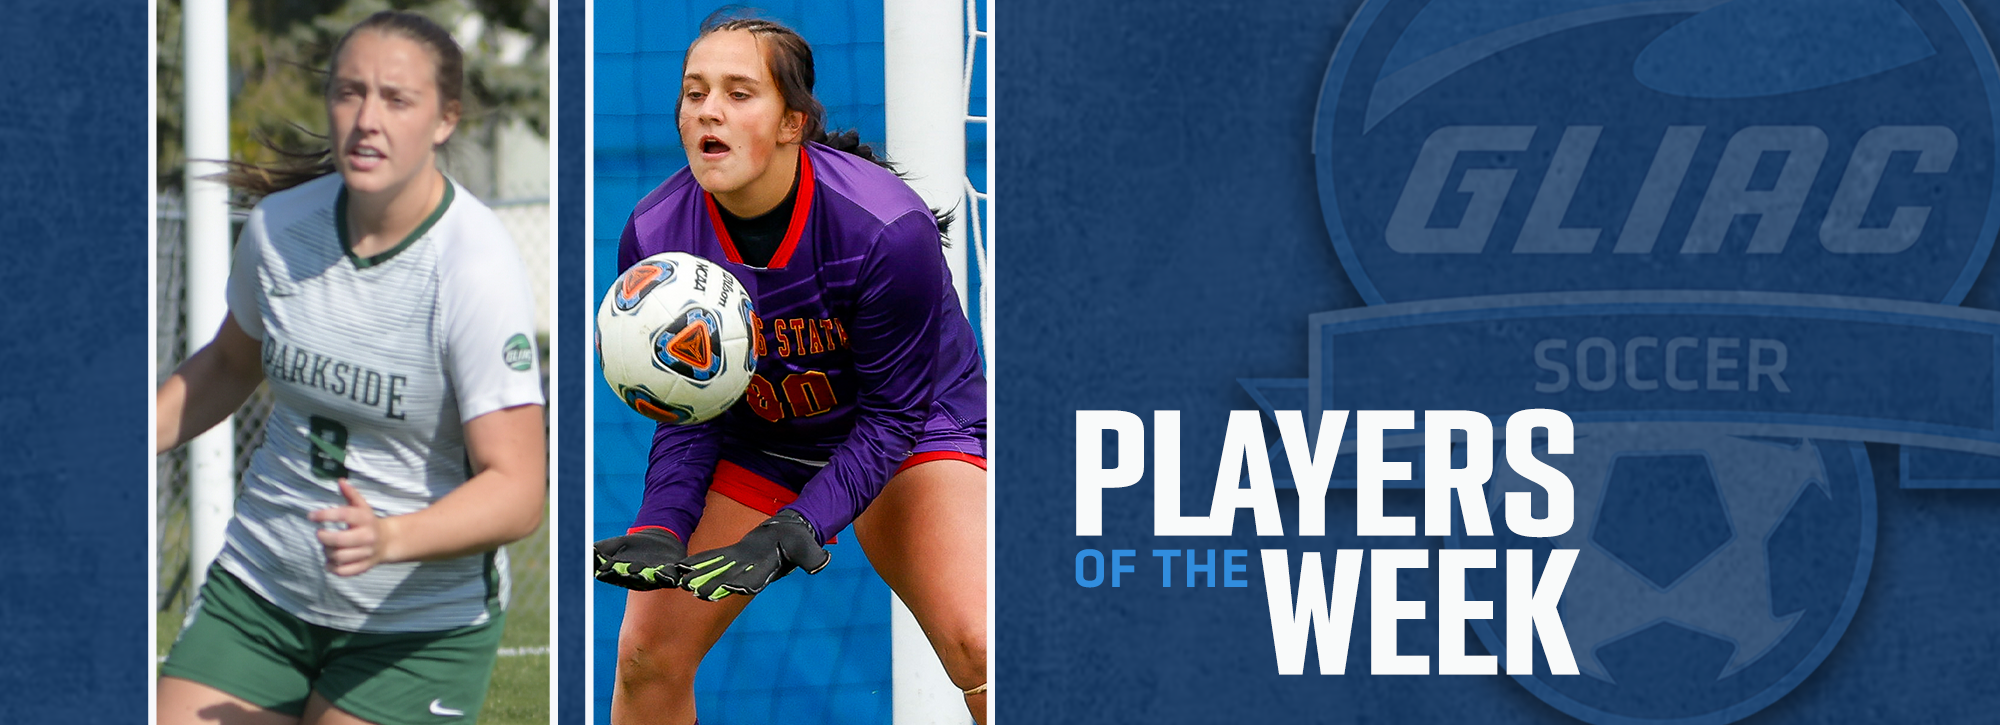 Parkside's Baker and FSU's Mosallaei honored as women's soccer GLIAC Players of the Week